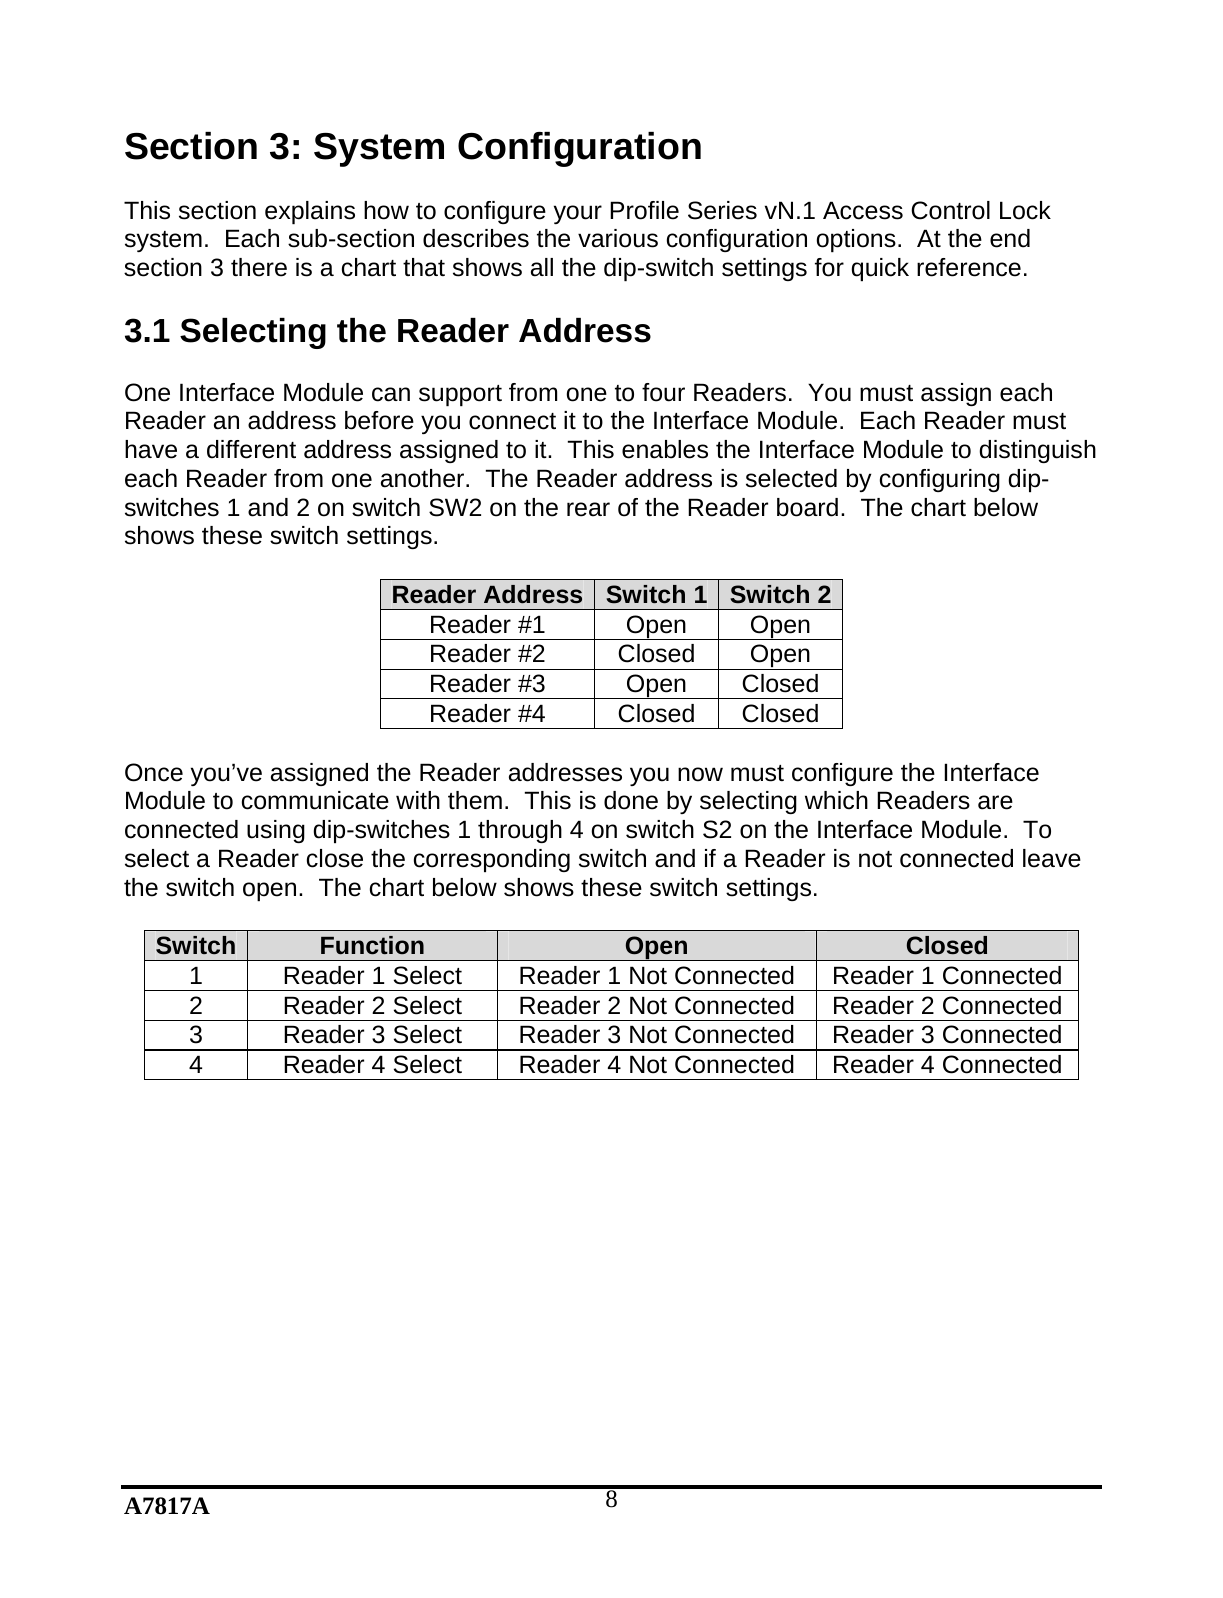 A7817A  8Section 3: System Configuration  This section explains how to configure your Profile Series vN.1 Access Control Lock system.  Each sub-section describes the various configuration options.  At the end section 3 there is a chart that shows all the dip-switch settings for quick reference.  3.1 Selecting the Reader Address  One Interface Module can support from one to four Readers.  You must assign each Reader an address before you connect it to the Interface Module.  Each Reader must have a different address assigned to it.  This enables the Interface Module to distinguish each Reader from one another.  The Reader address is selected by configuring dip-switches 1 and 2 on switch SW2 on the rear of the Reader board.  The chart below shows these switch settings.  Reader Address Switch 1 Switch 2Reader #1  Open  Open Reader #2  Closed  Open Reader #3  Open  Closed Reader #4  Closed  Closed  Once you’ve assigned the Reader addresses you now must configure the Interface Module to communicate with them.  This is done by selecting which Readers are connected using dip-switches 1 through 4 on switch S2 on the Interface Module.  To select a Reader close the corresponding switch and if a Reader is not connected leave the switch open.  The chart below shows these switch settings.  Switch  Function  Open  Closed 1  Reader 1 Select  Reader 1 Not Connected  Reader 1 Connected 2  Reader 2 Select  Reader 2 Not Connected  Reader 2 Connected 3  Reader 3 Select  Reader 3 Not Connected  Reader 3 Connected 4  Reader 4 Select  Reader 4 Not Connected  Reader 4 Connected              